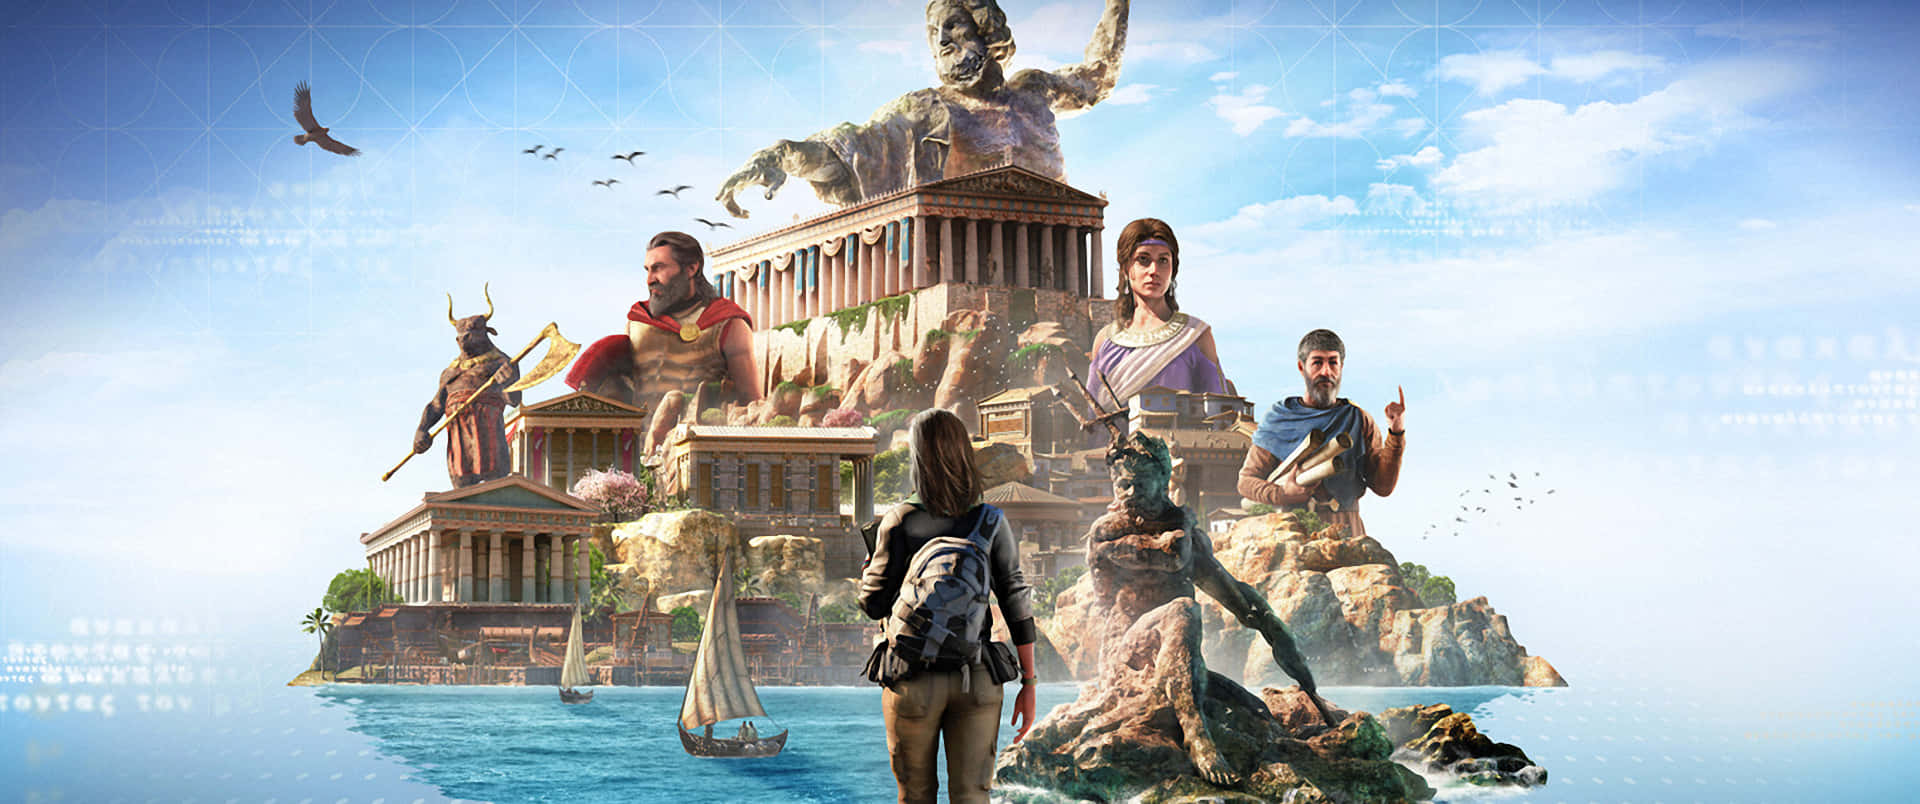 3440x1440p Assassin's Creed Odyssey Background Main Characters In An Island Background